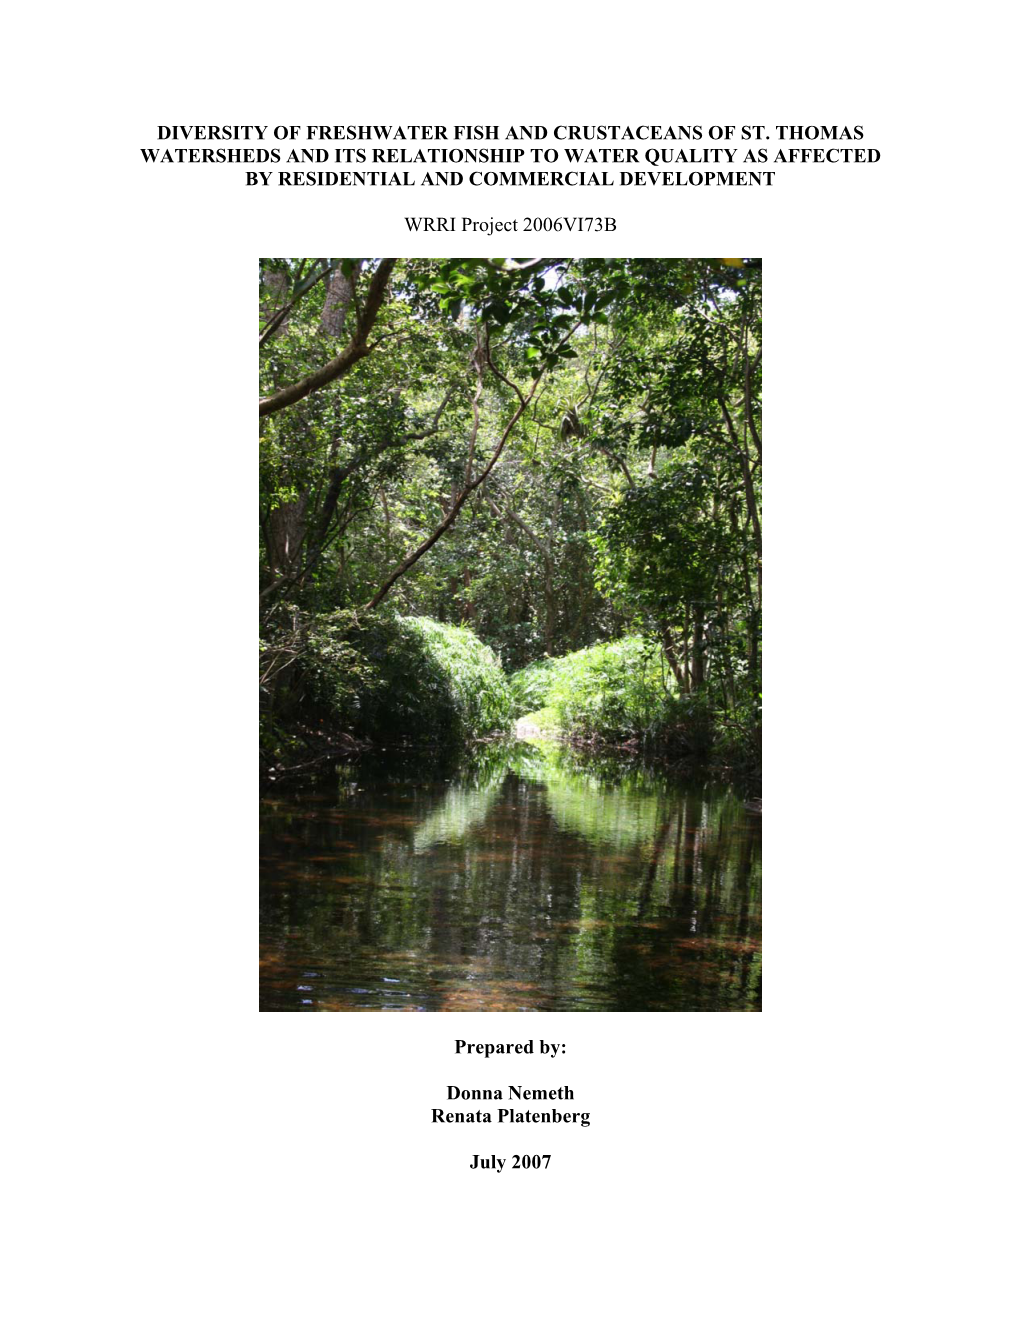 Diversity of Freshwater Fish and Crustaceans of St. Thomas Watersheds and Its Relationship to Water Quality As Affected by Residential and Commercial Development